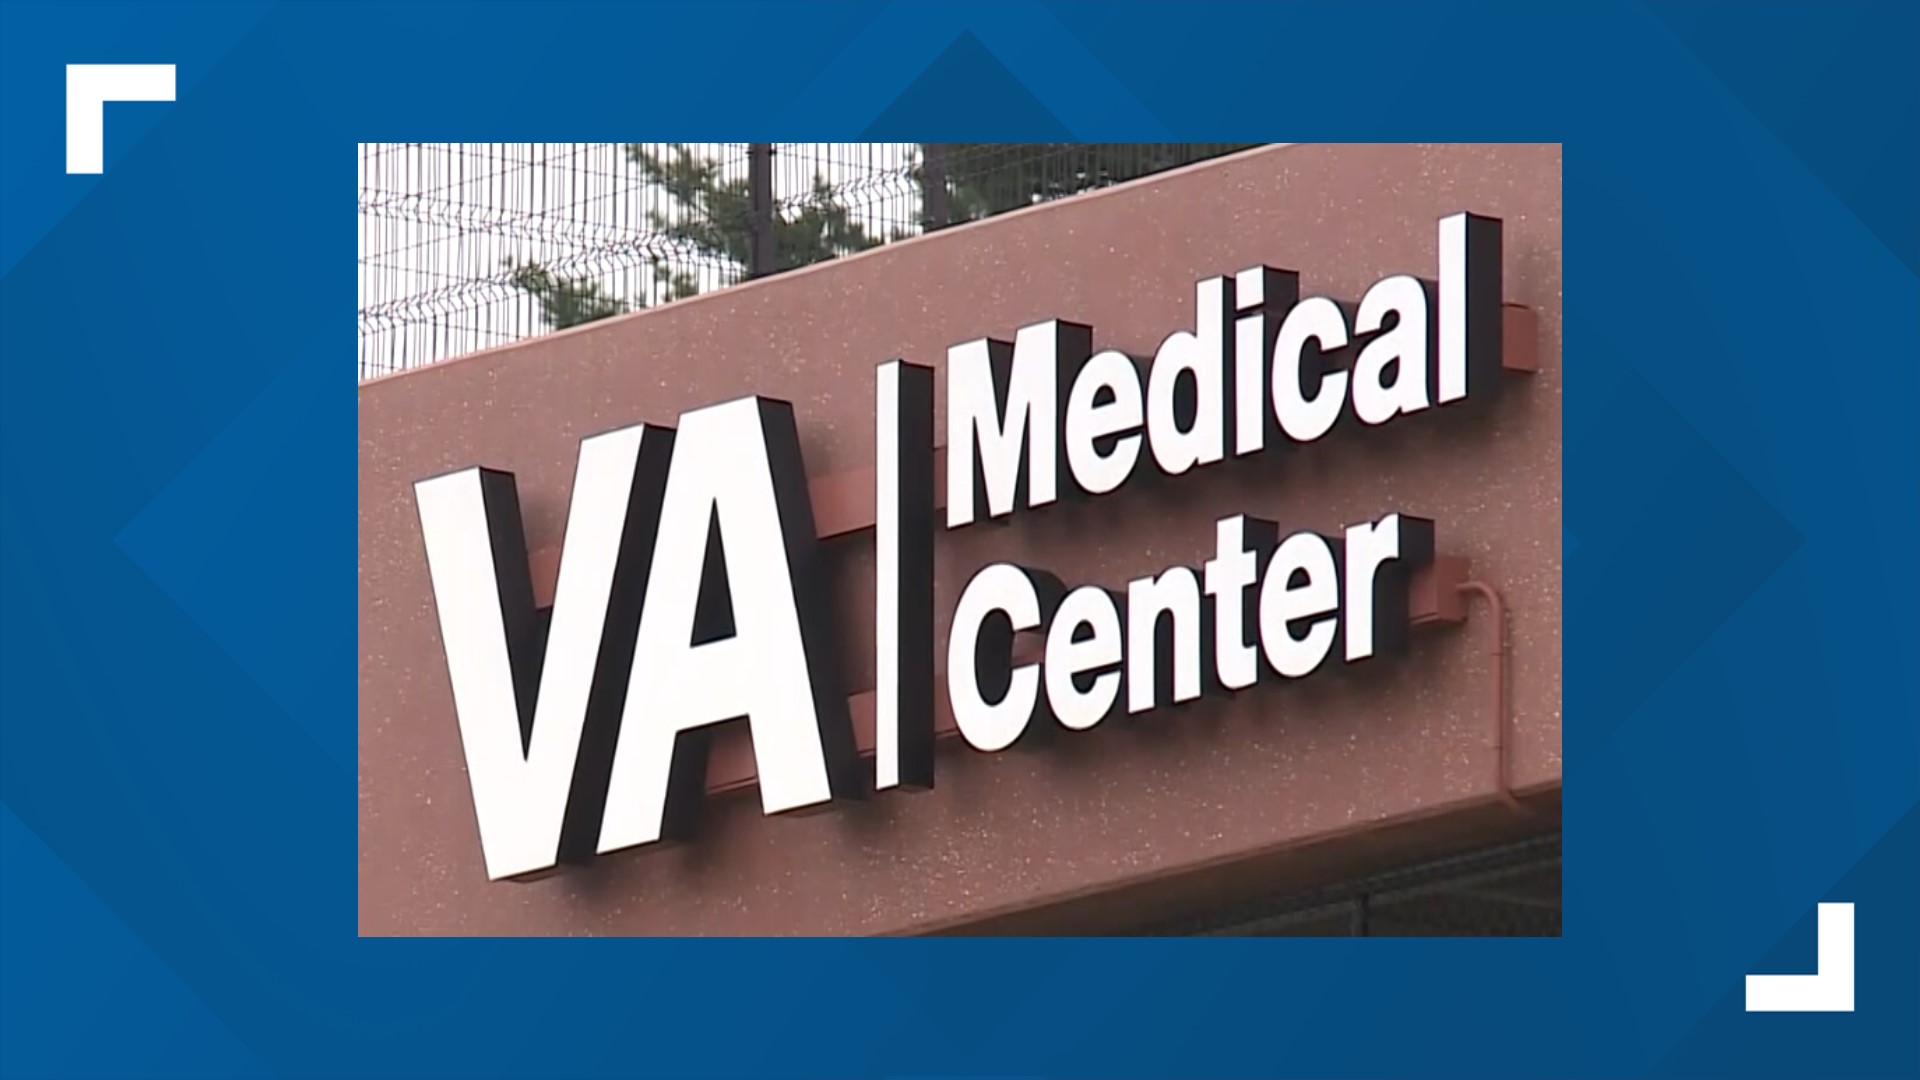 Starting Jan. 17, veterans in acute suicidal crisis can go to any VA or non-VA healthcare facility for free emergency healthcare.